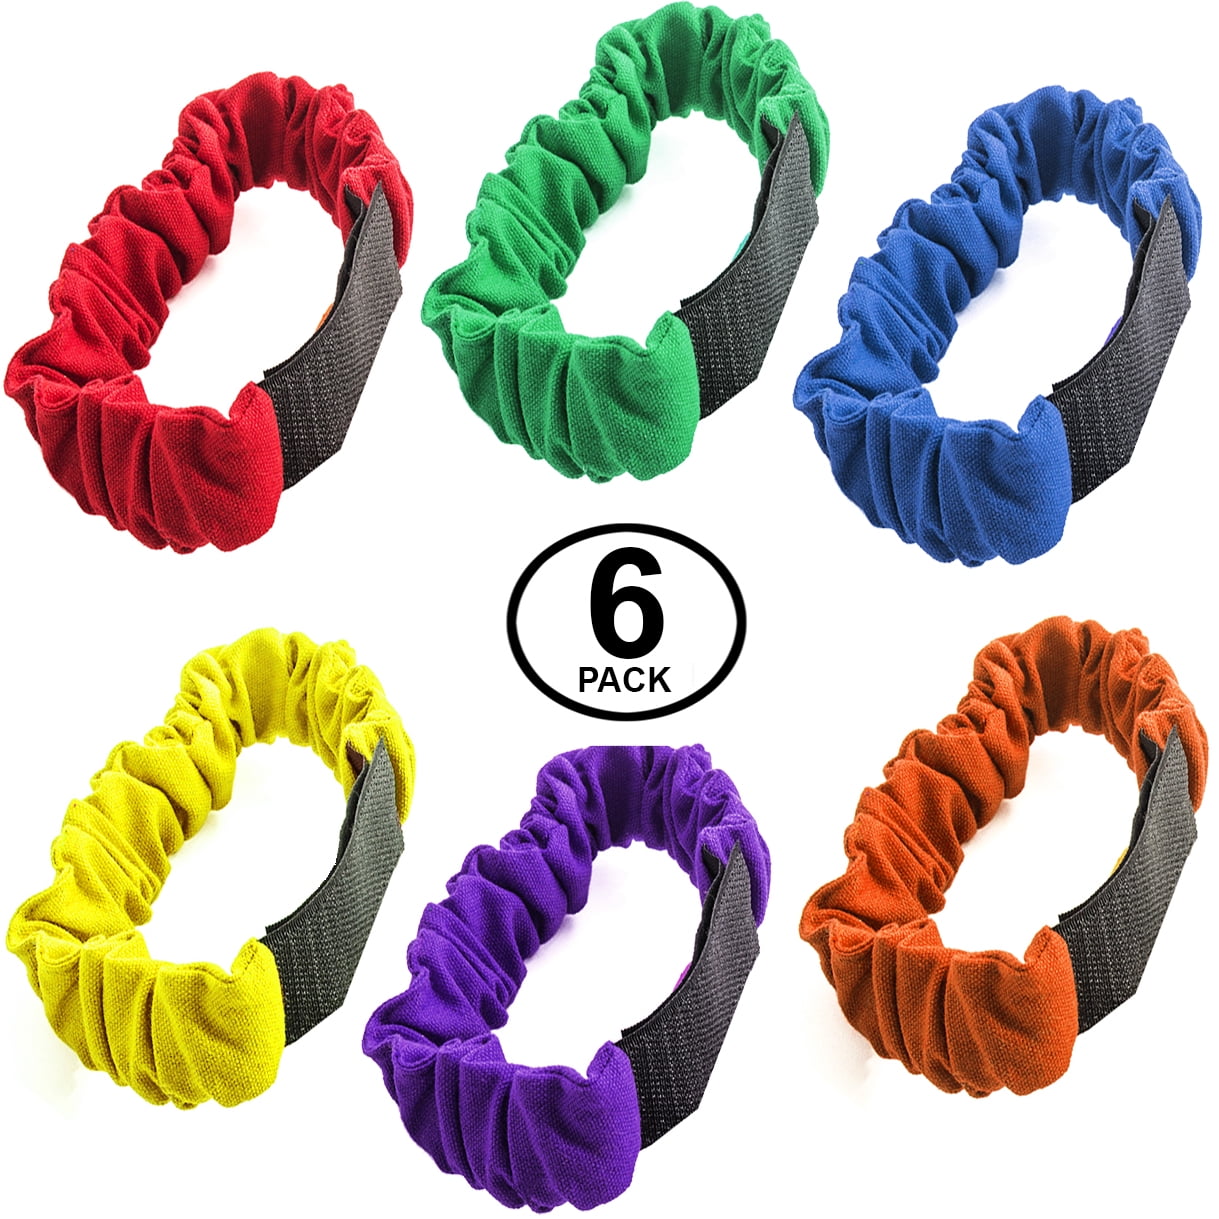 ZXSWEET 8Pcs 3-Legged Race Bands Elastic Tie Rope Strap Band with 4 Assorted ... 